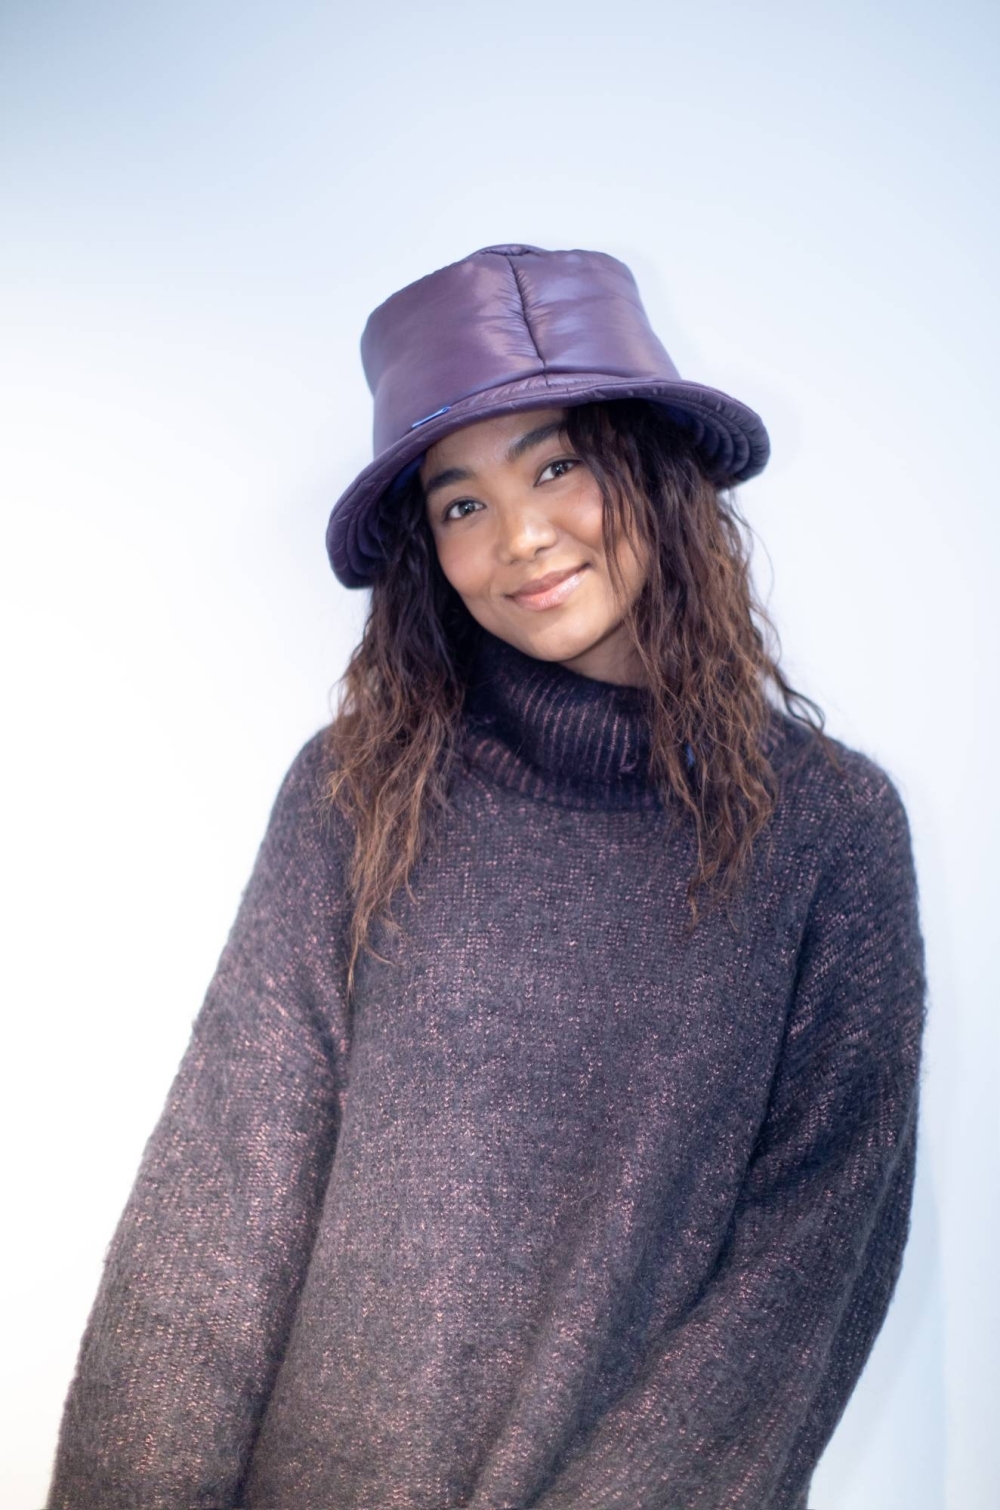 Singer Crystal Kay has seen her body of work get a second listen by younger listeners who are only now discovering the sounds of the 2000s that she helped pioneer.